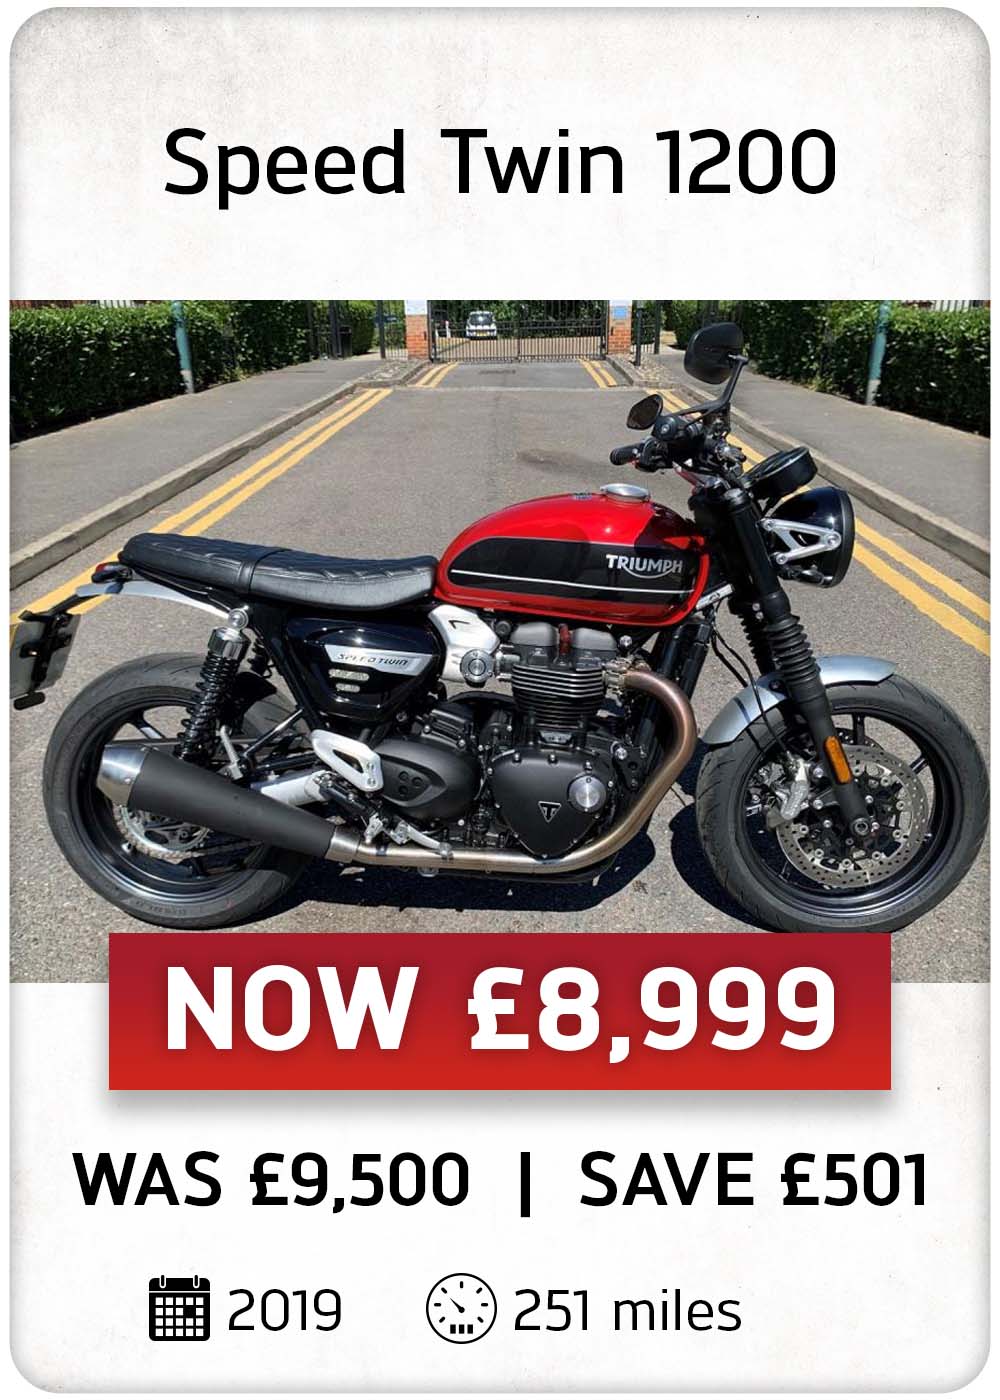 Triumph SPEED TWIN 1200 for sale in our Used Bike Specials at Laguna Motorcycles in Maidstone